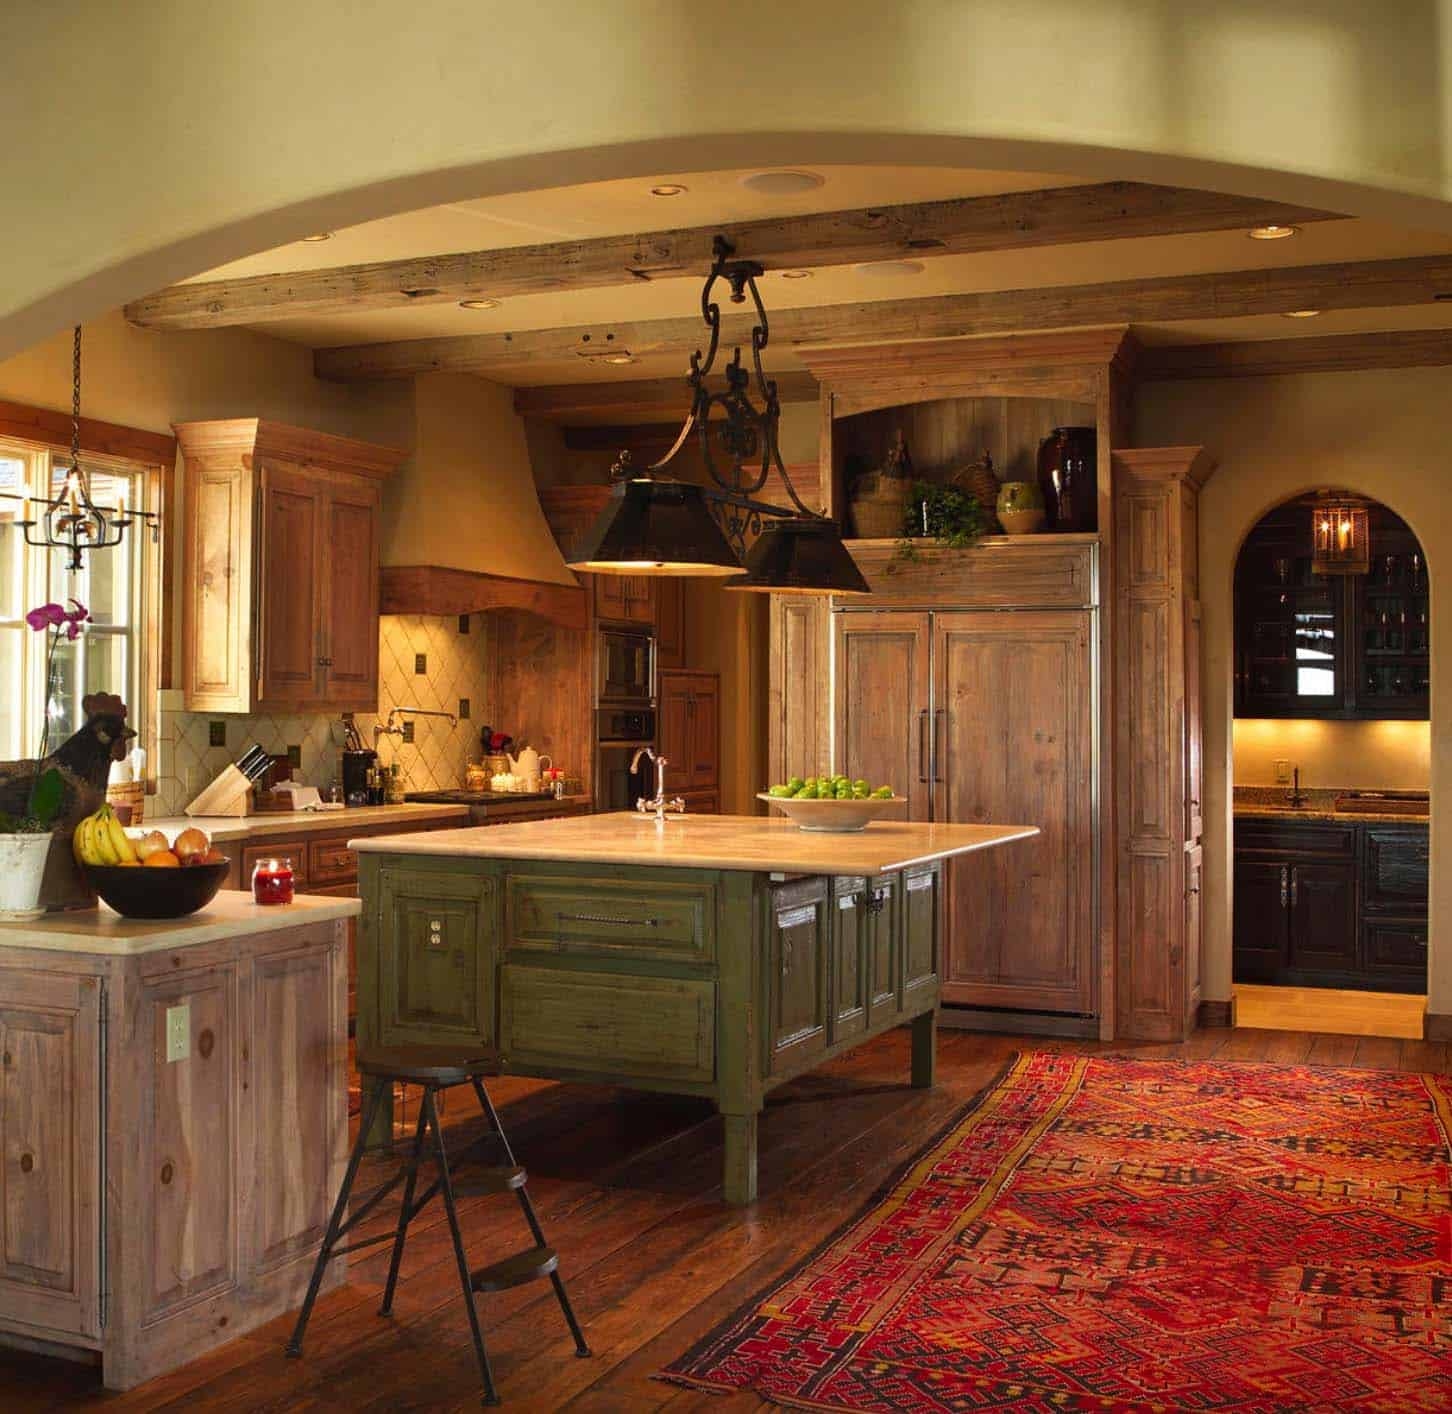 30 Rustic Kitchen Ideas That Are Full of Charm